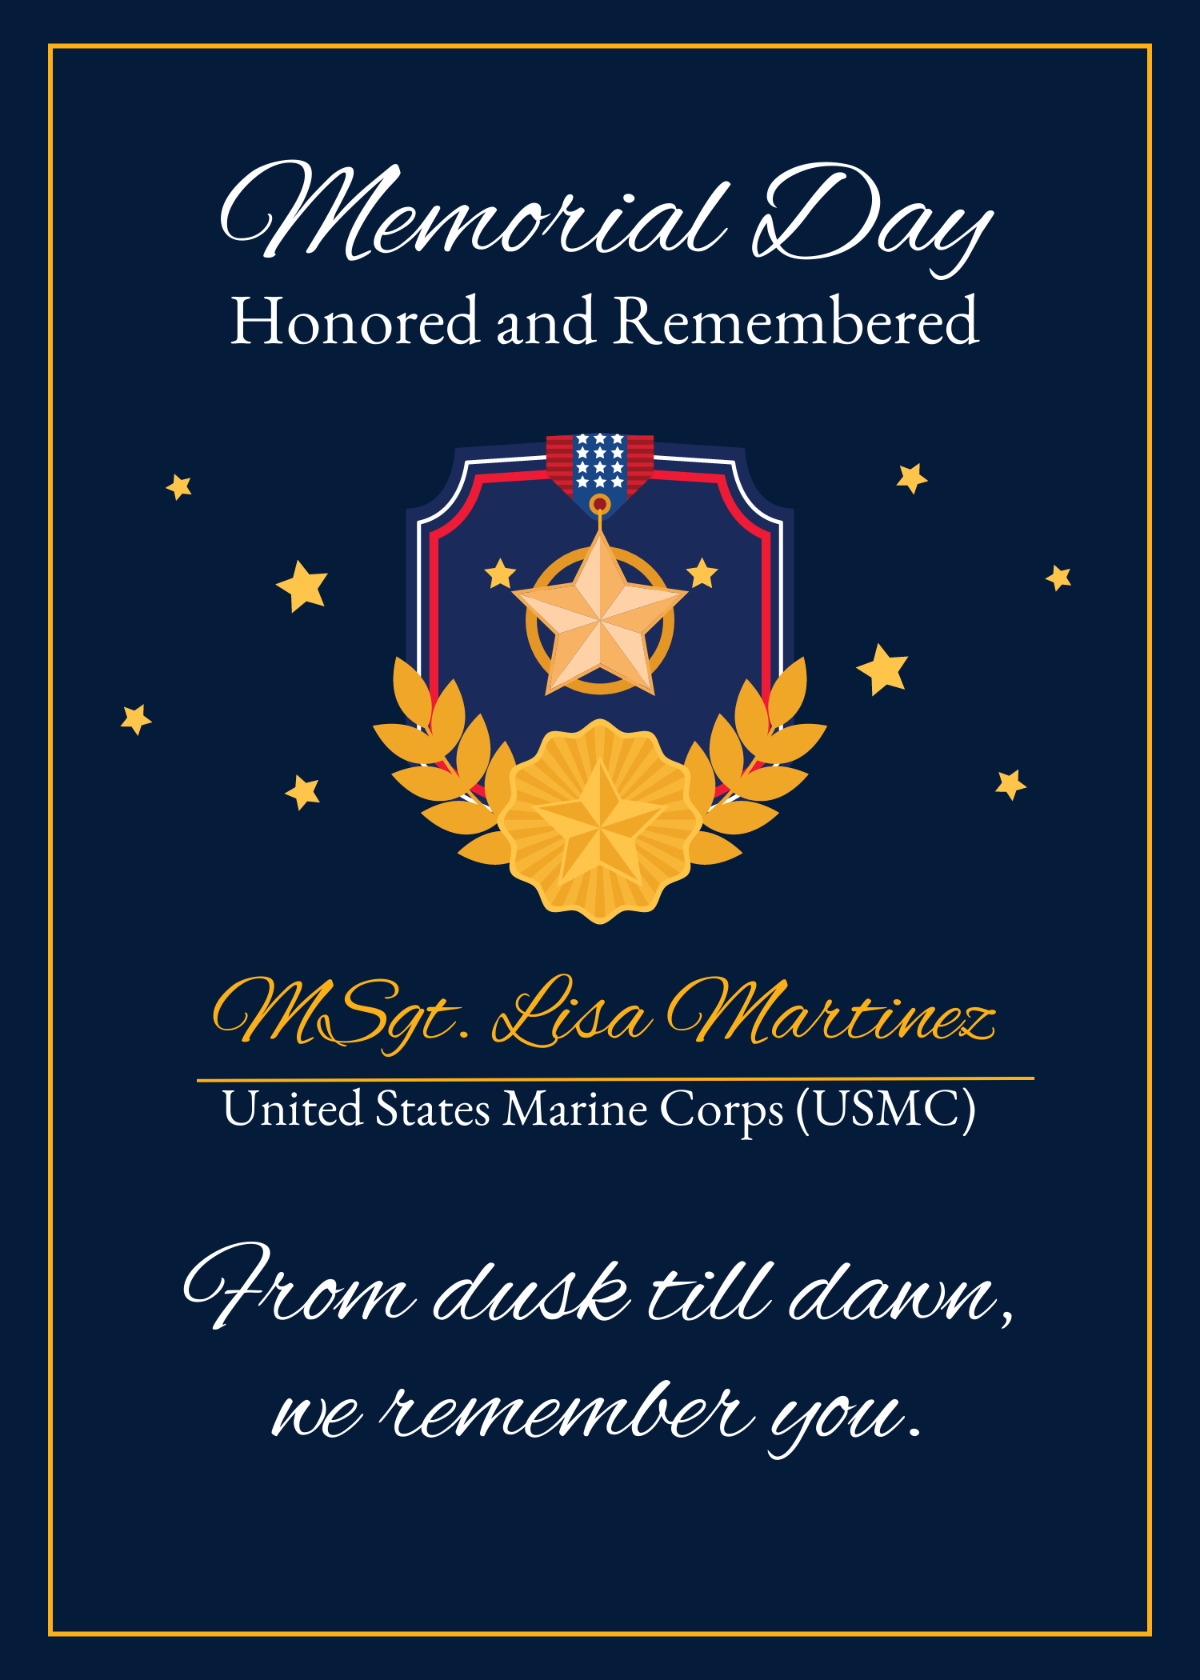 Memorial Day Remembrance Card Template